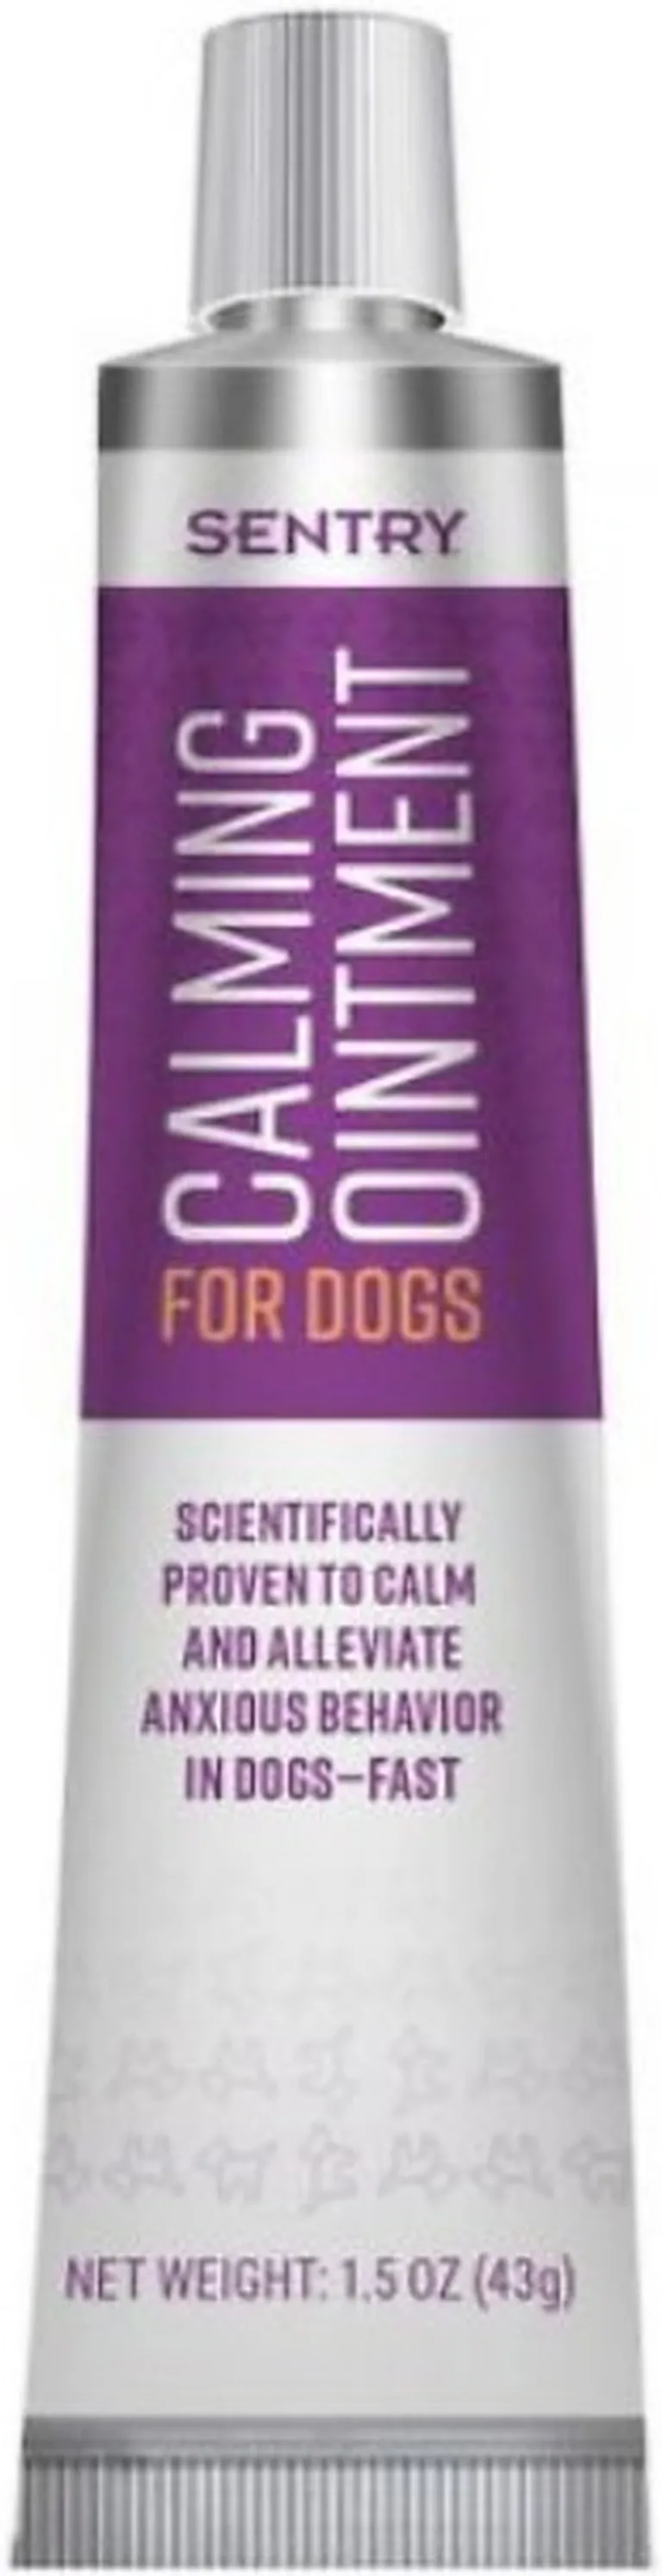 Sentry Calming Ointment for Anxious Dogs Photo 3